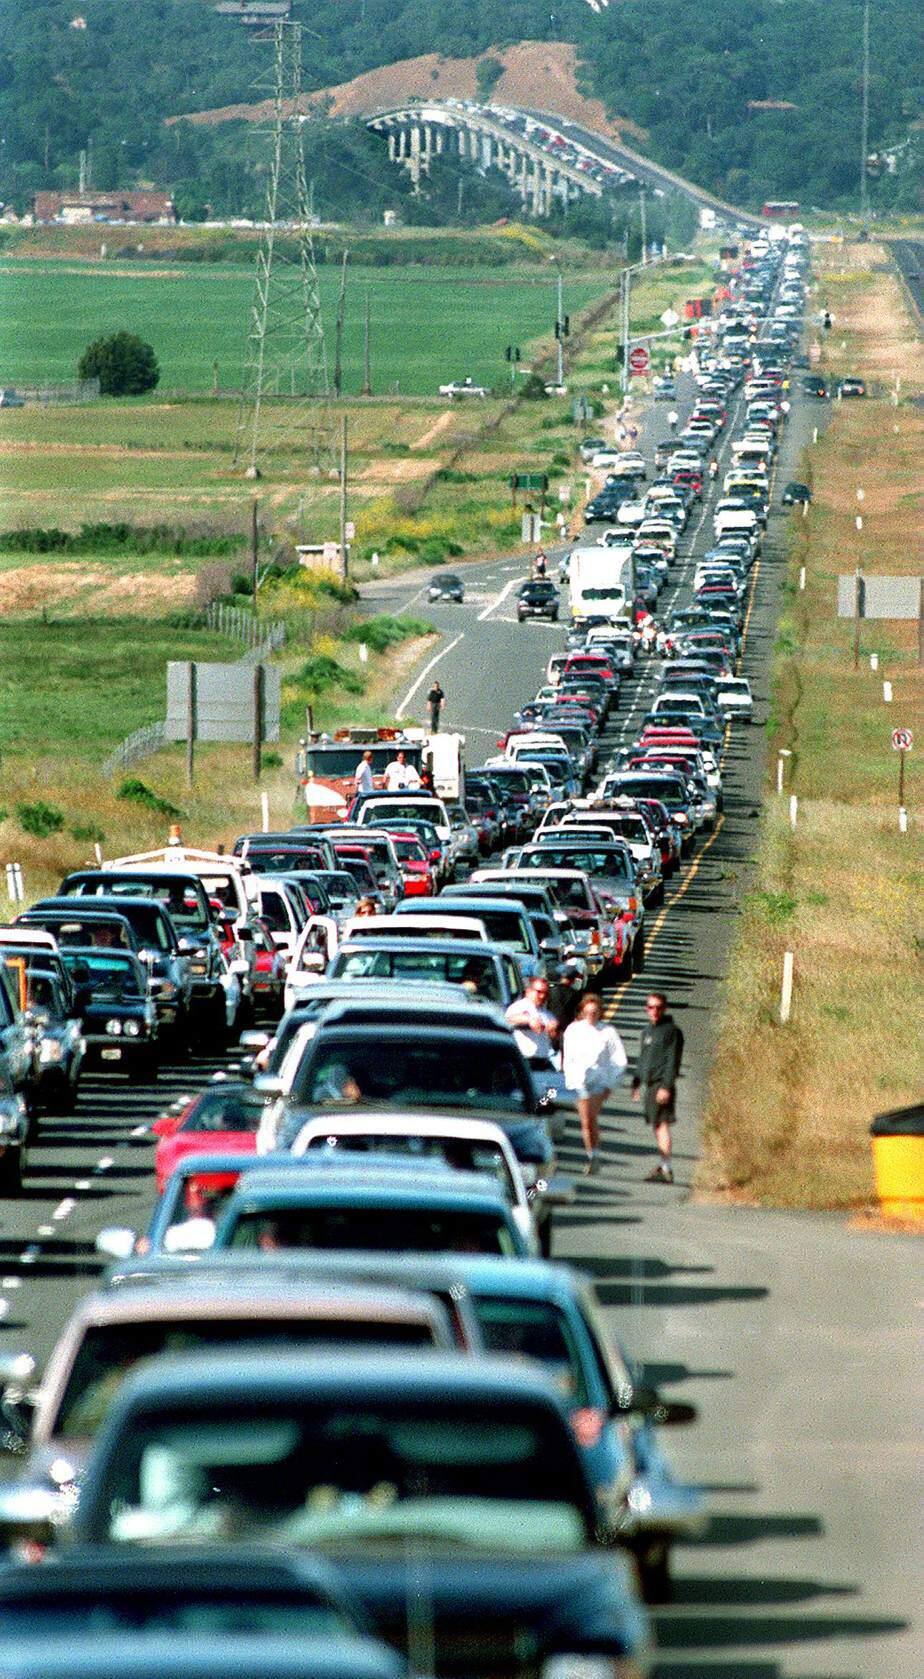 The NASCAR Toyota/Save Mart 350 finals on Sunday invariably draws big crowds and creates extensive traffic backups, especially eastbound on Highway 37. Some delays can be 2-1/2 hours or more. In the background is the port of Sonoma and the bridge that goes over the Petaluma River. (Kent Porter / Press Democrat file)